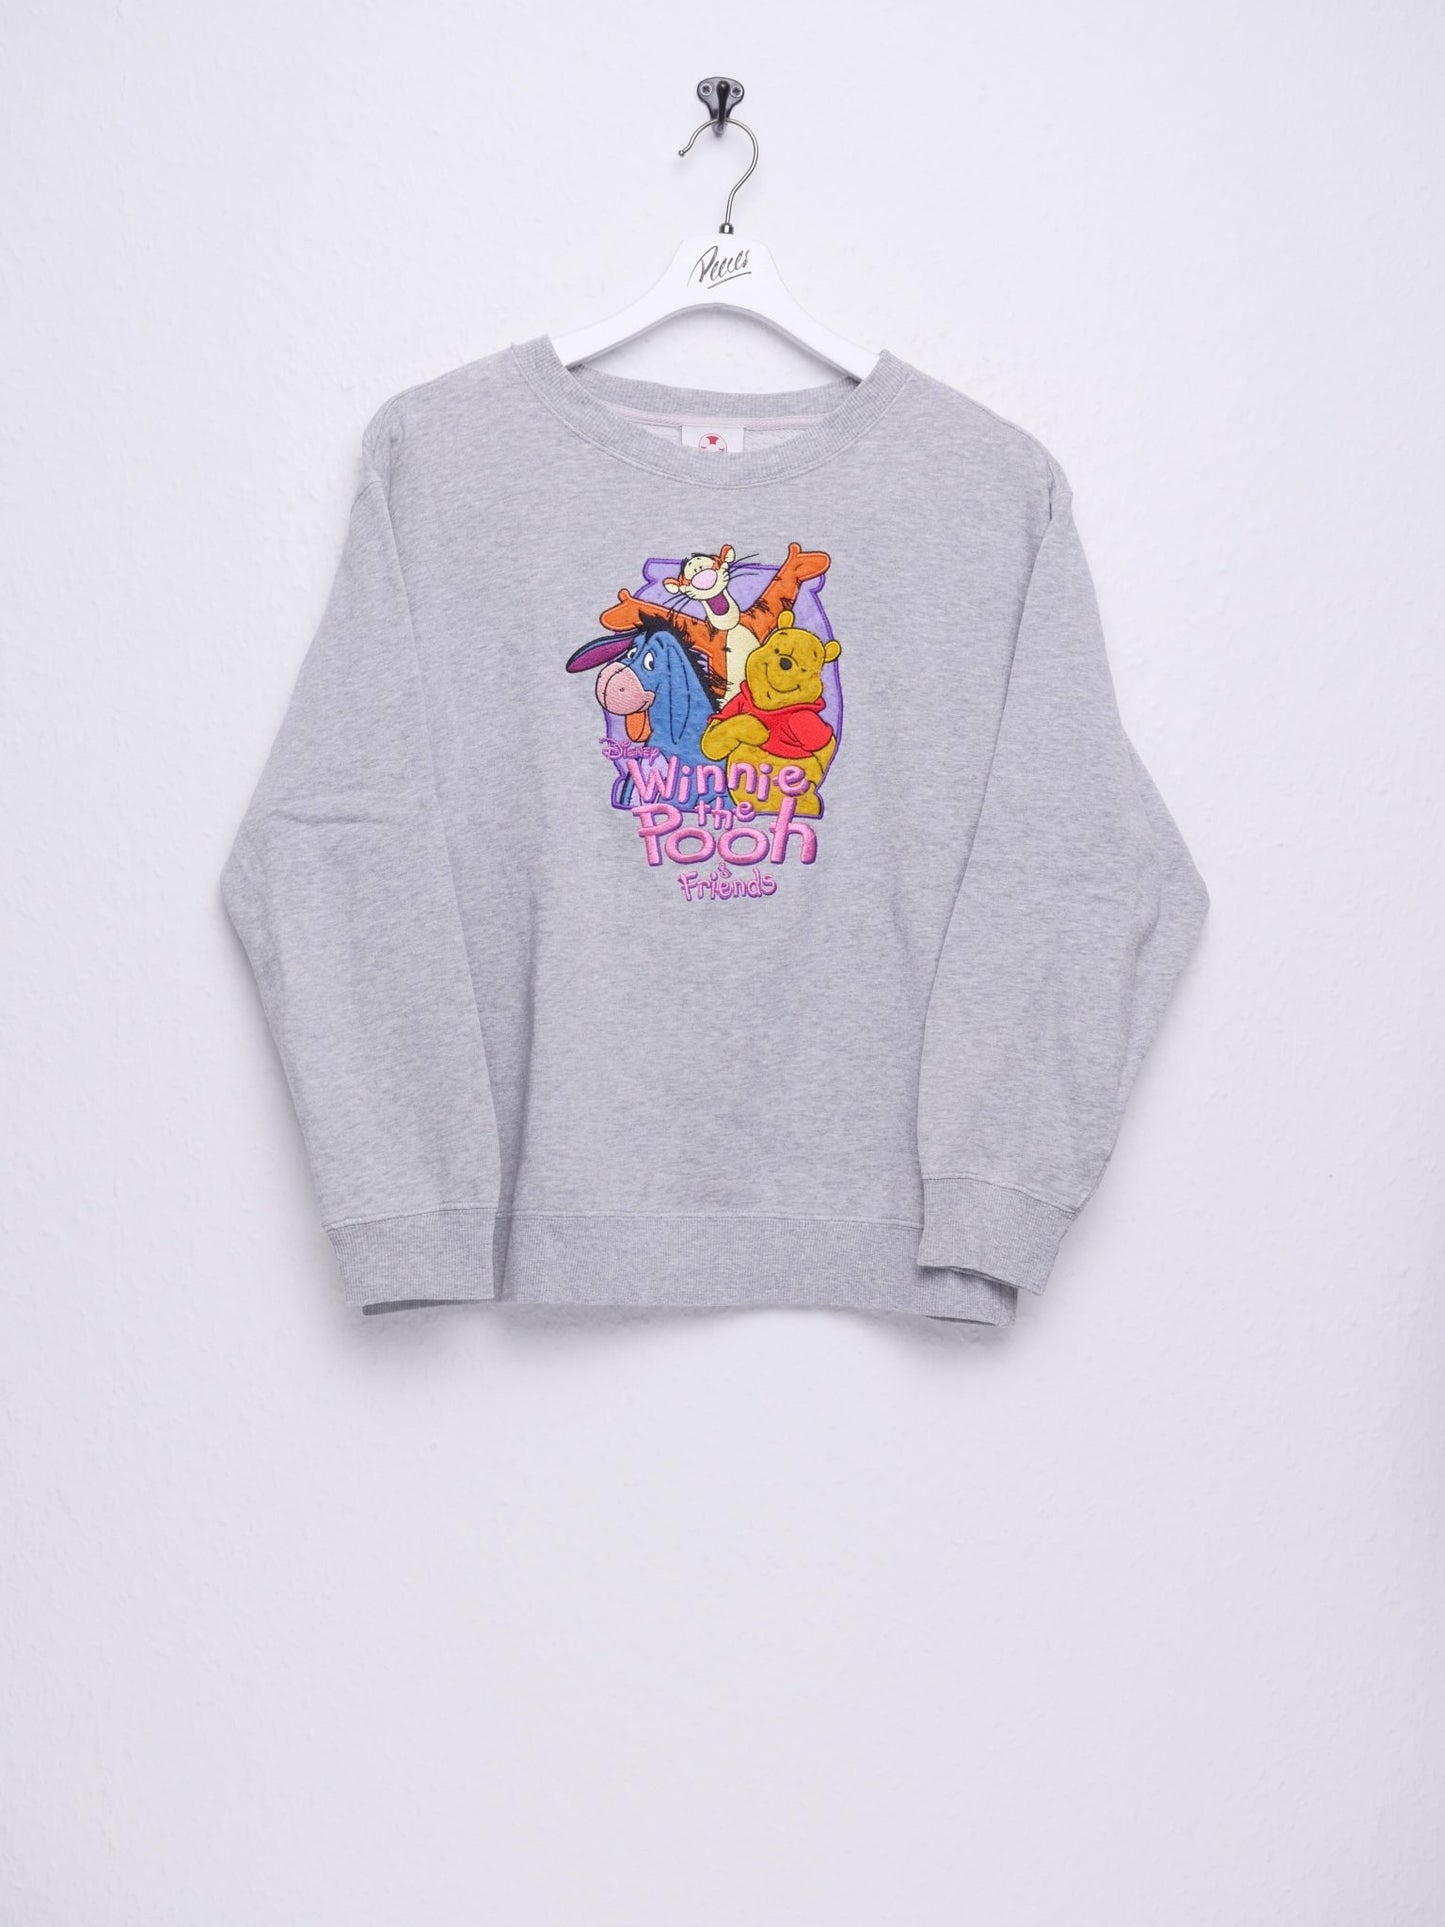 disney winnie the pooh embroidered Graphic Sweater - Peeces